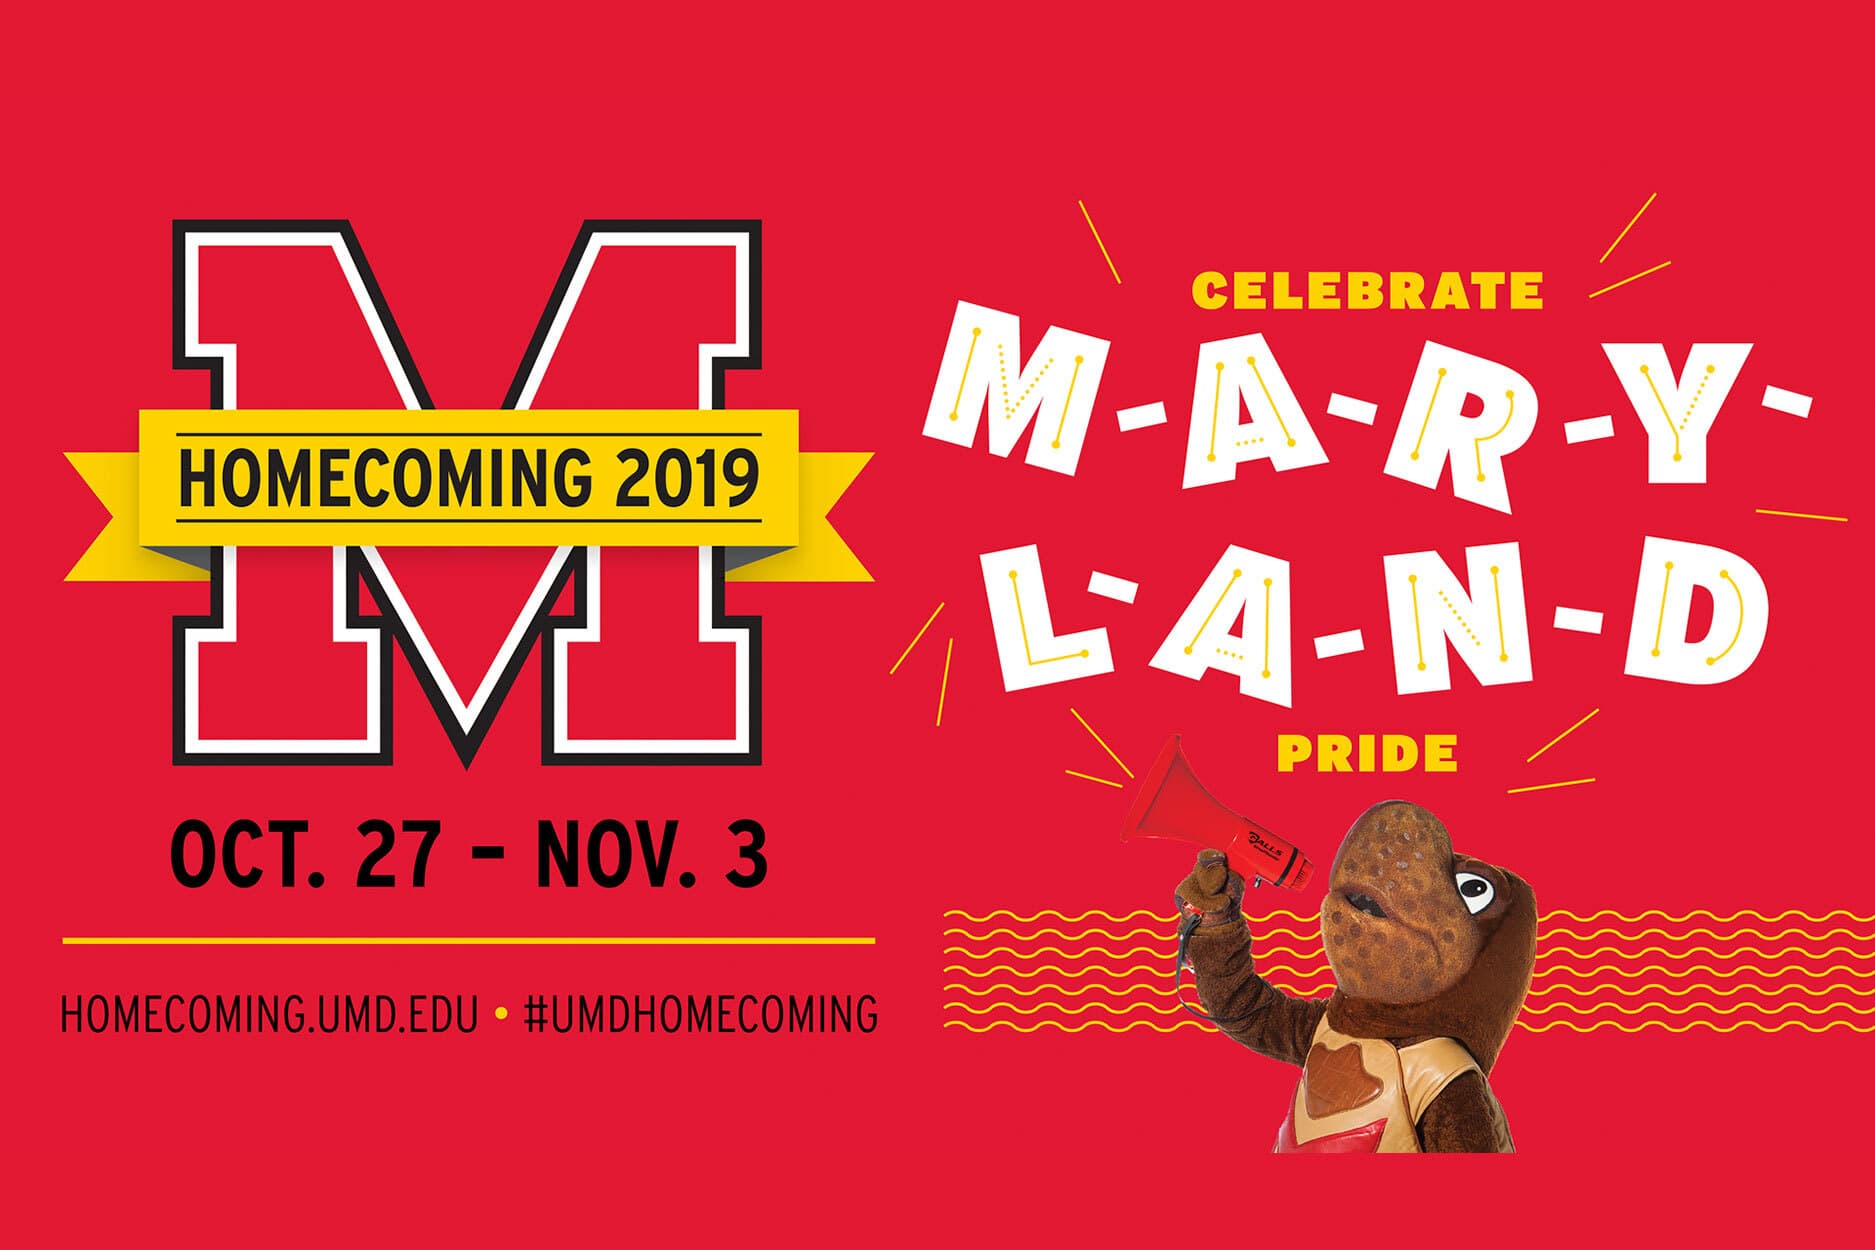 Digital homecoming graphic for social and email distribution. Details about the celebration dates and website sit next to Testudo the mascot holding a mega-phone seeming to shout the letters spelling Maryland